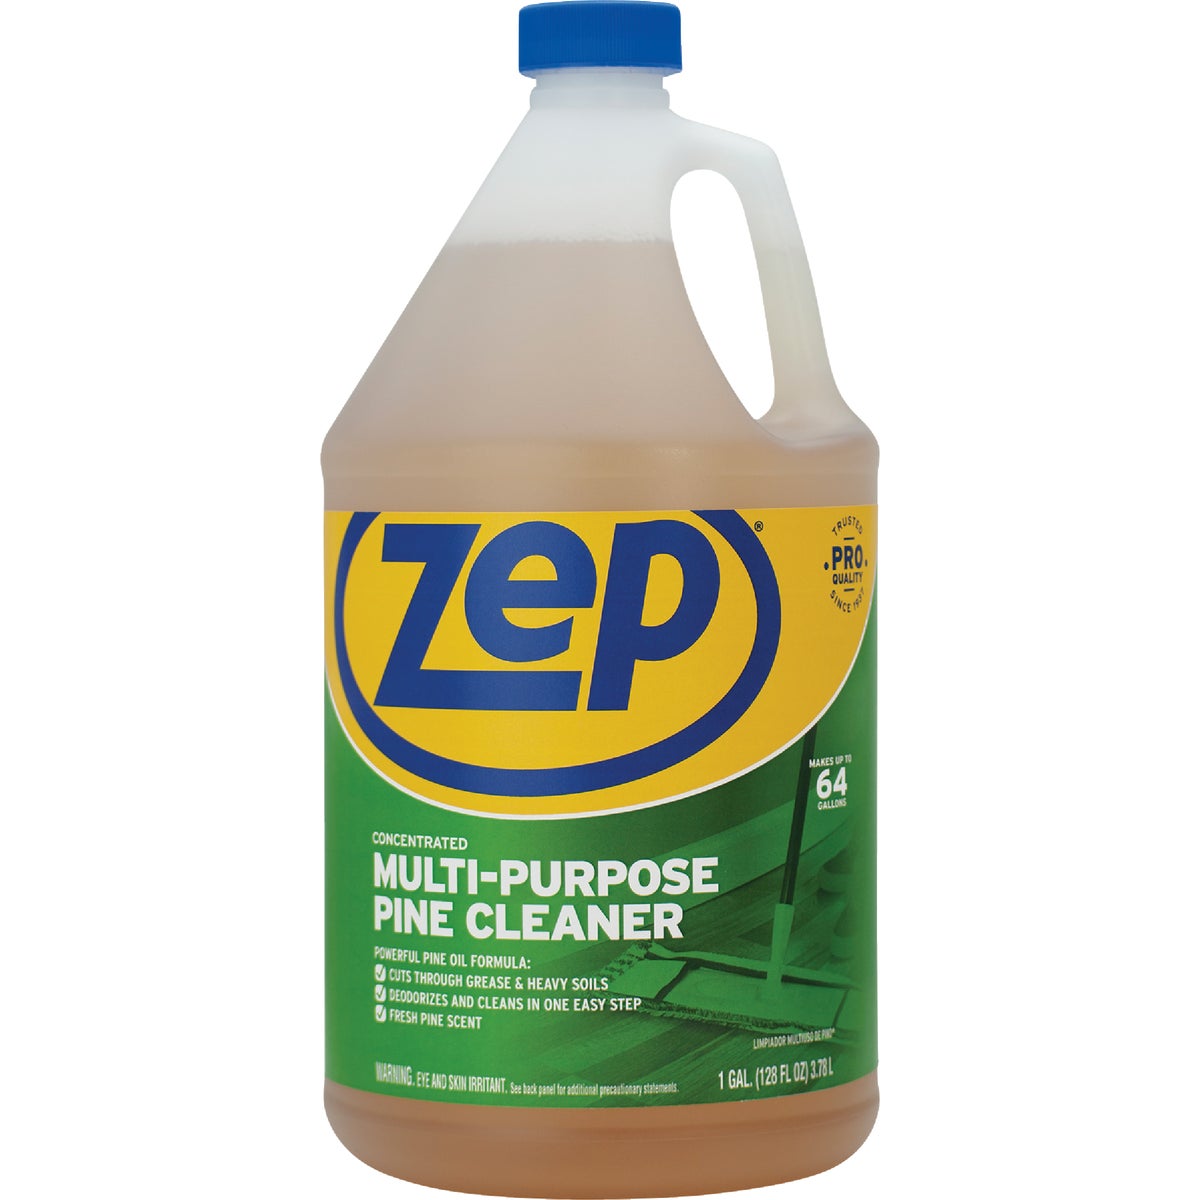 Item 618852, Zep pine multipurpose cleaner is ammonia-free and safe for tinted windows.